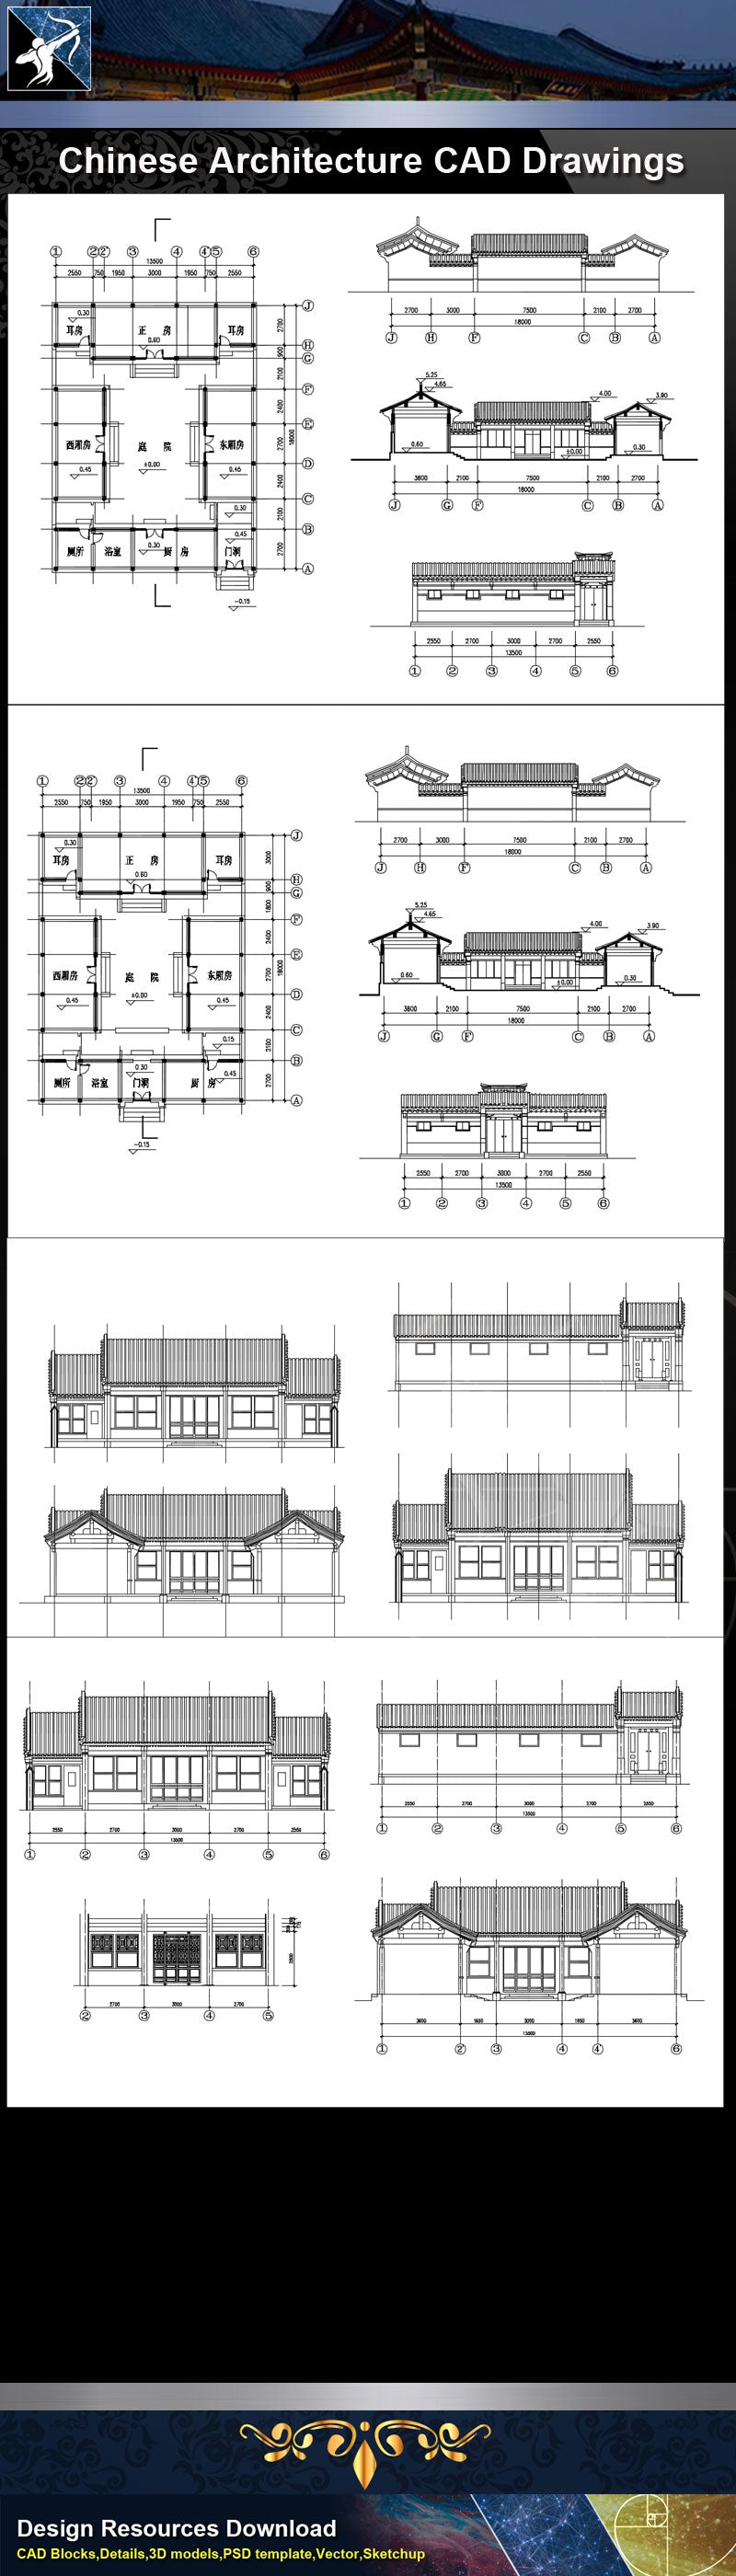 ★Chinese Architecture CAD Drawings-Chinese Courtyard